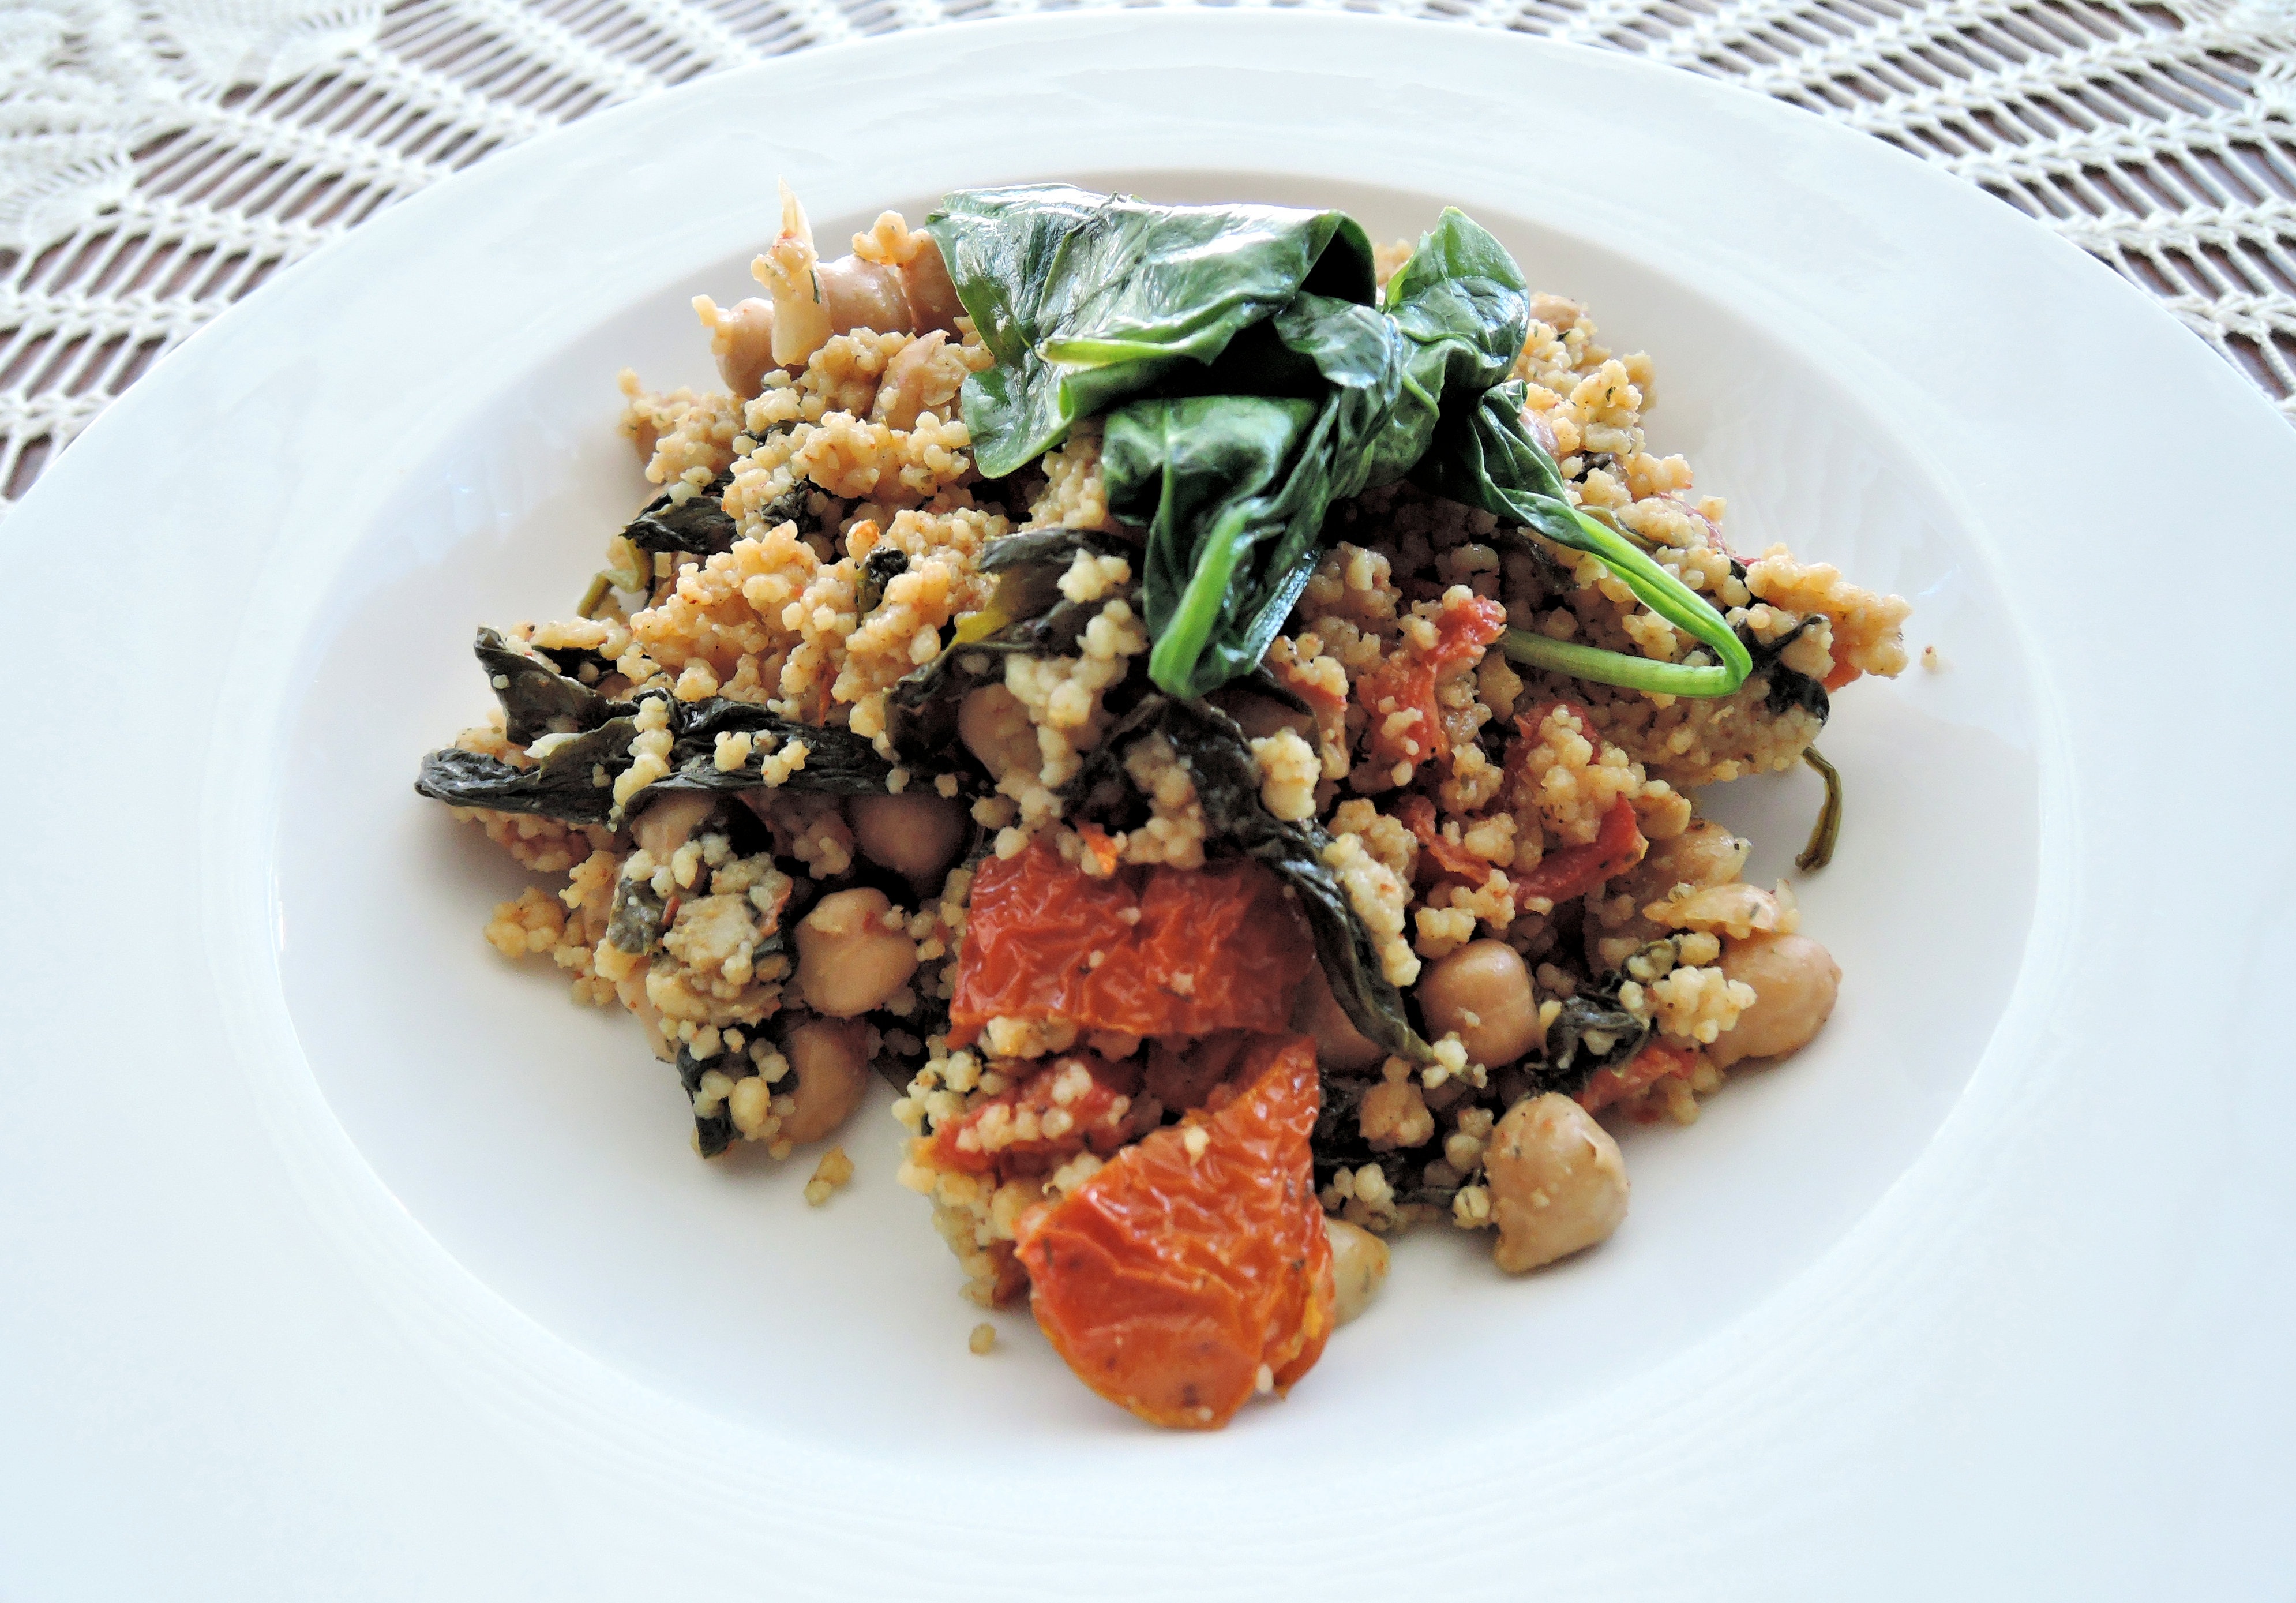 Curried Couscous with Spinach and Chickpeas